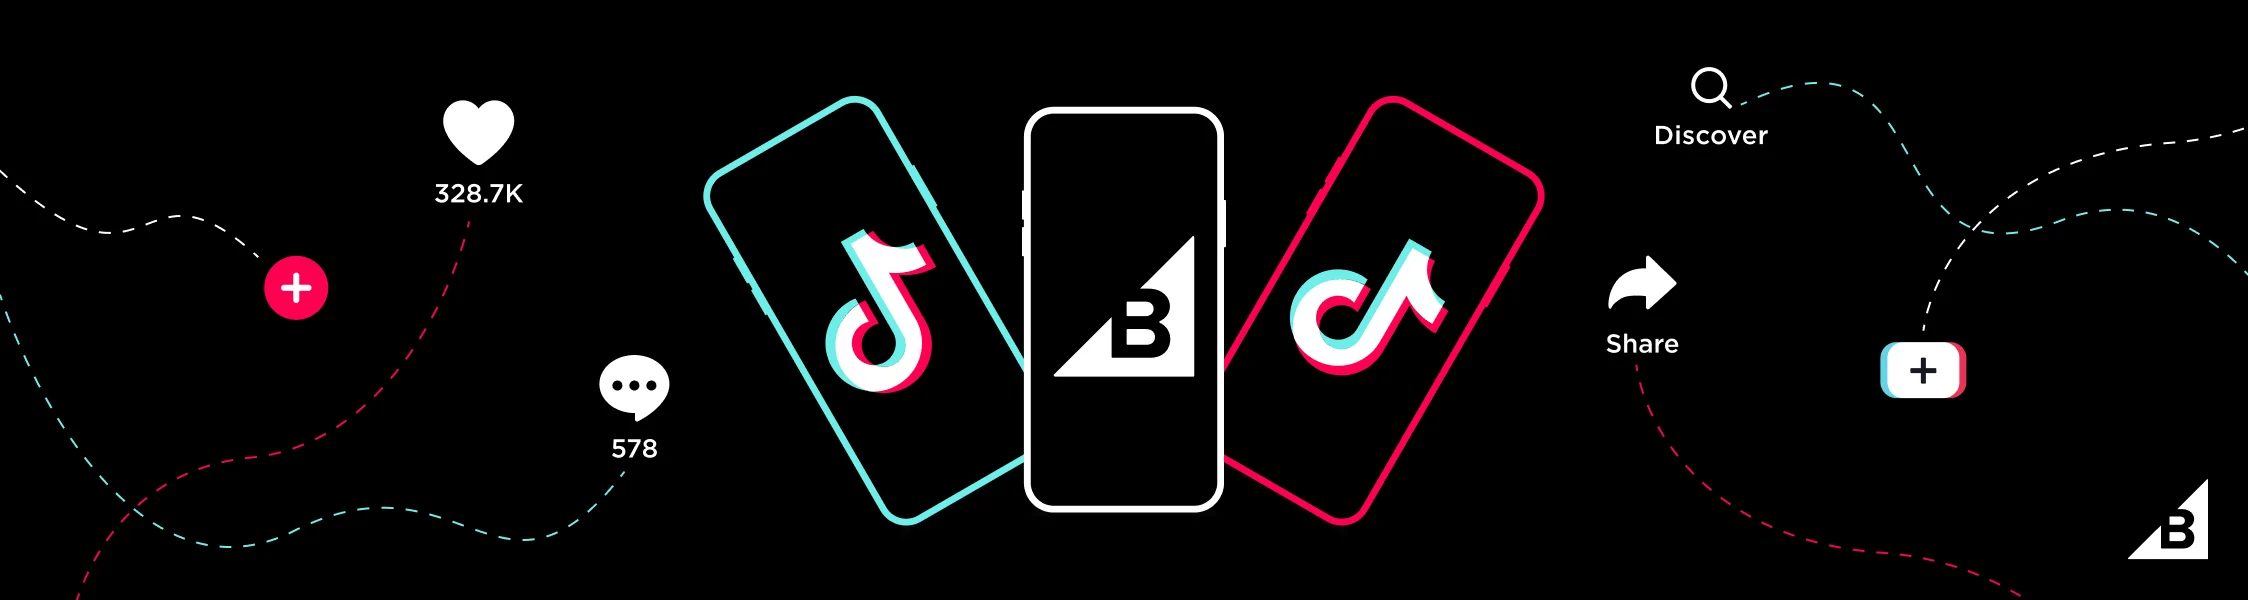 TikTok trumps Google as a search engine, research finds